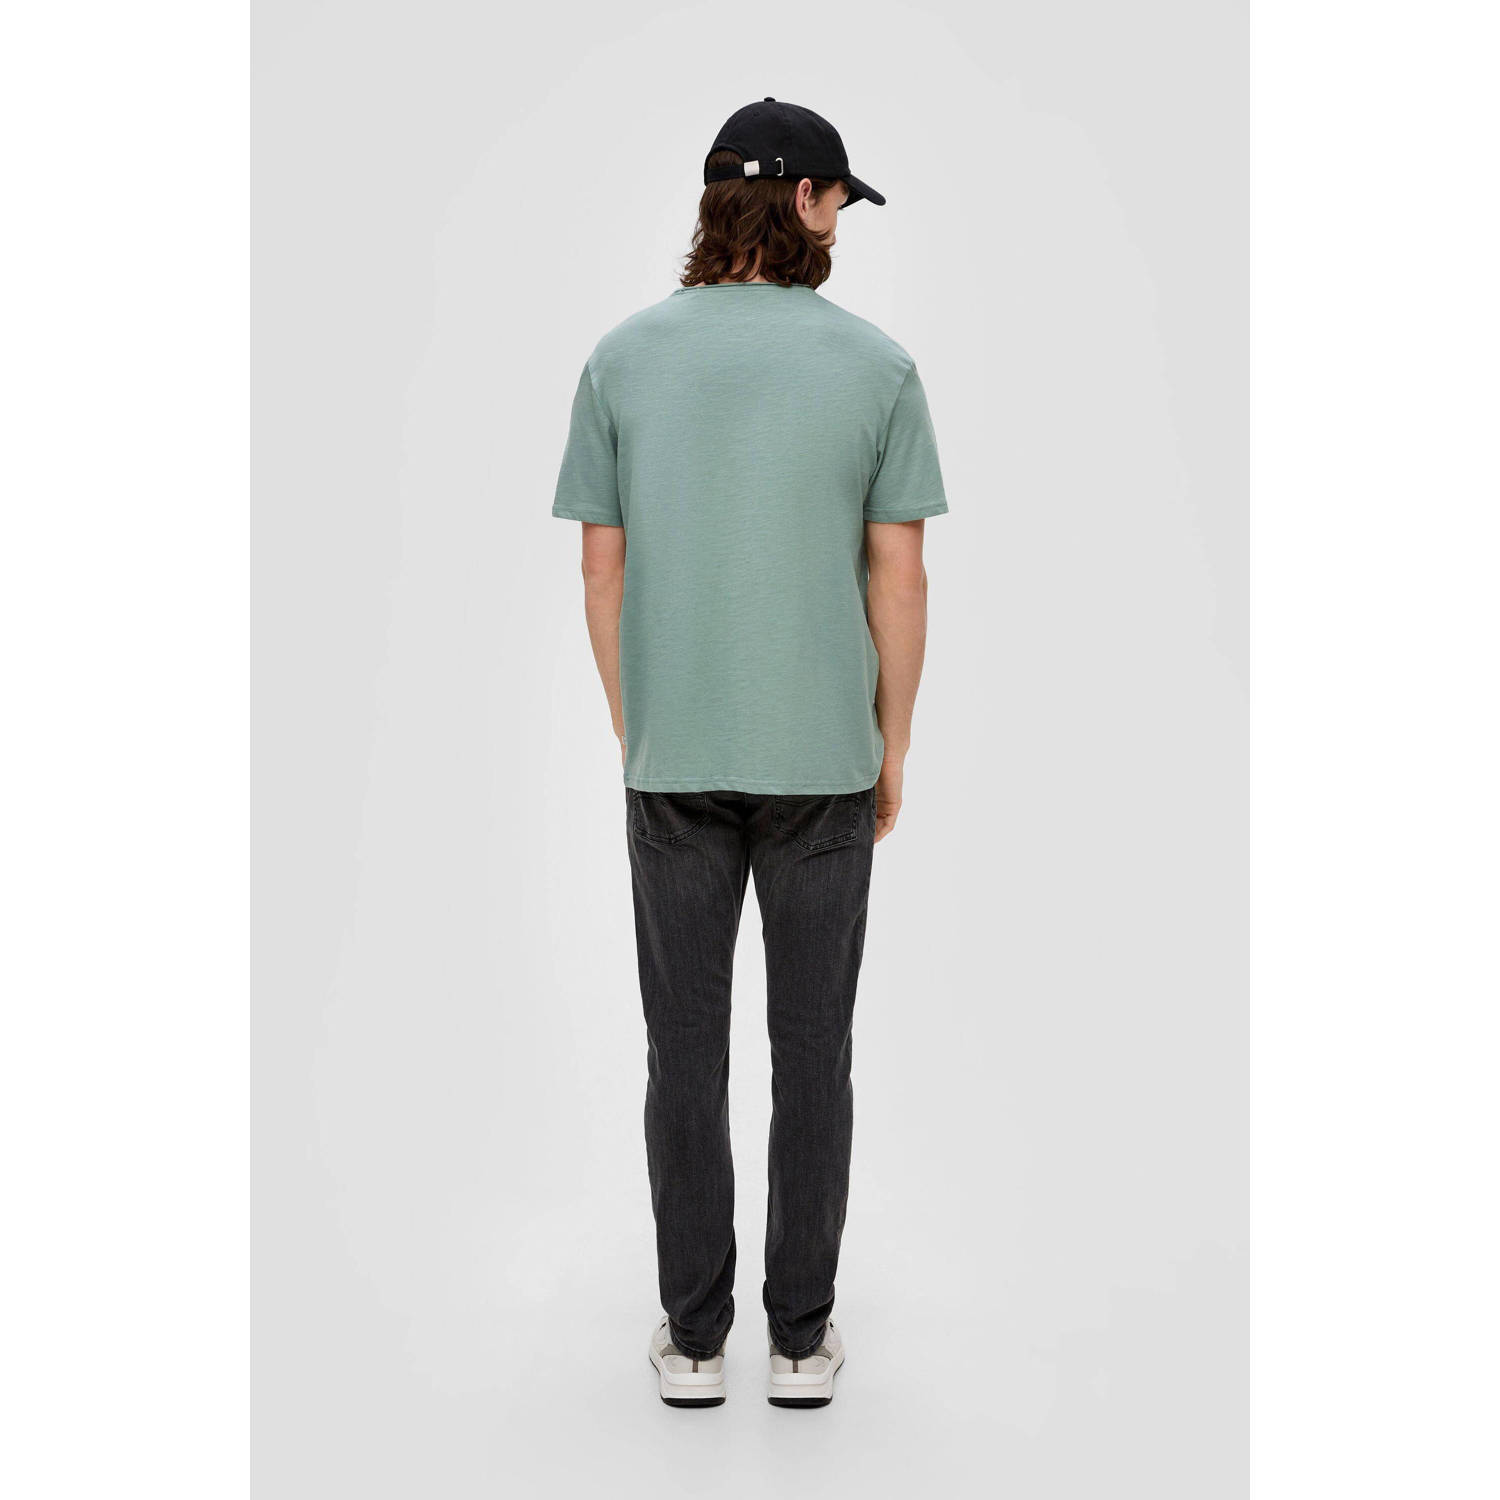 Q S by s.Oliver regular fit T-shirt groen